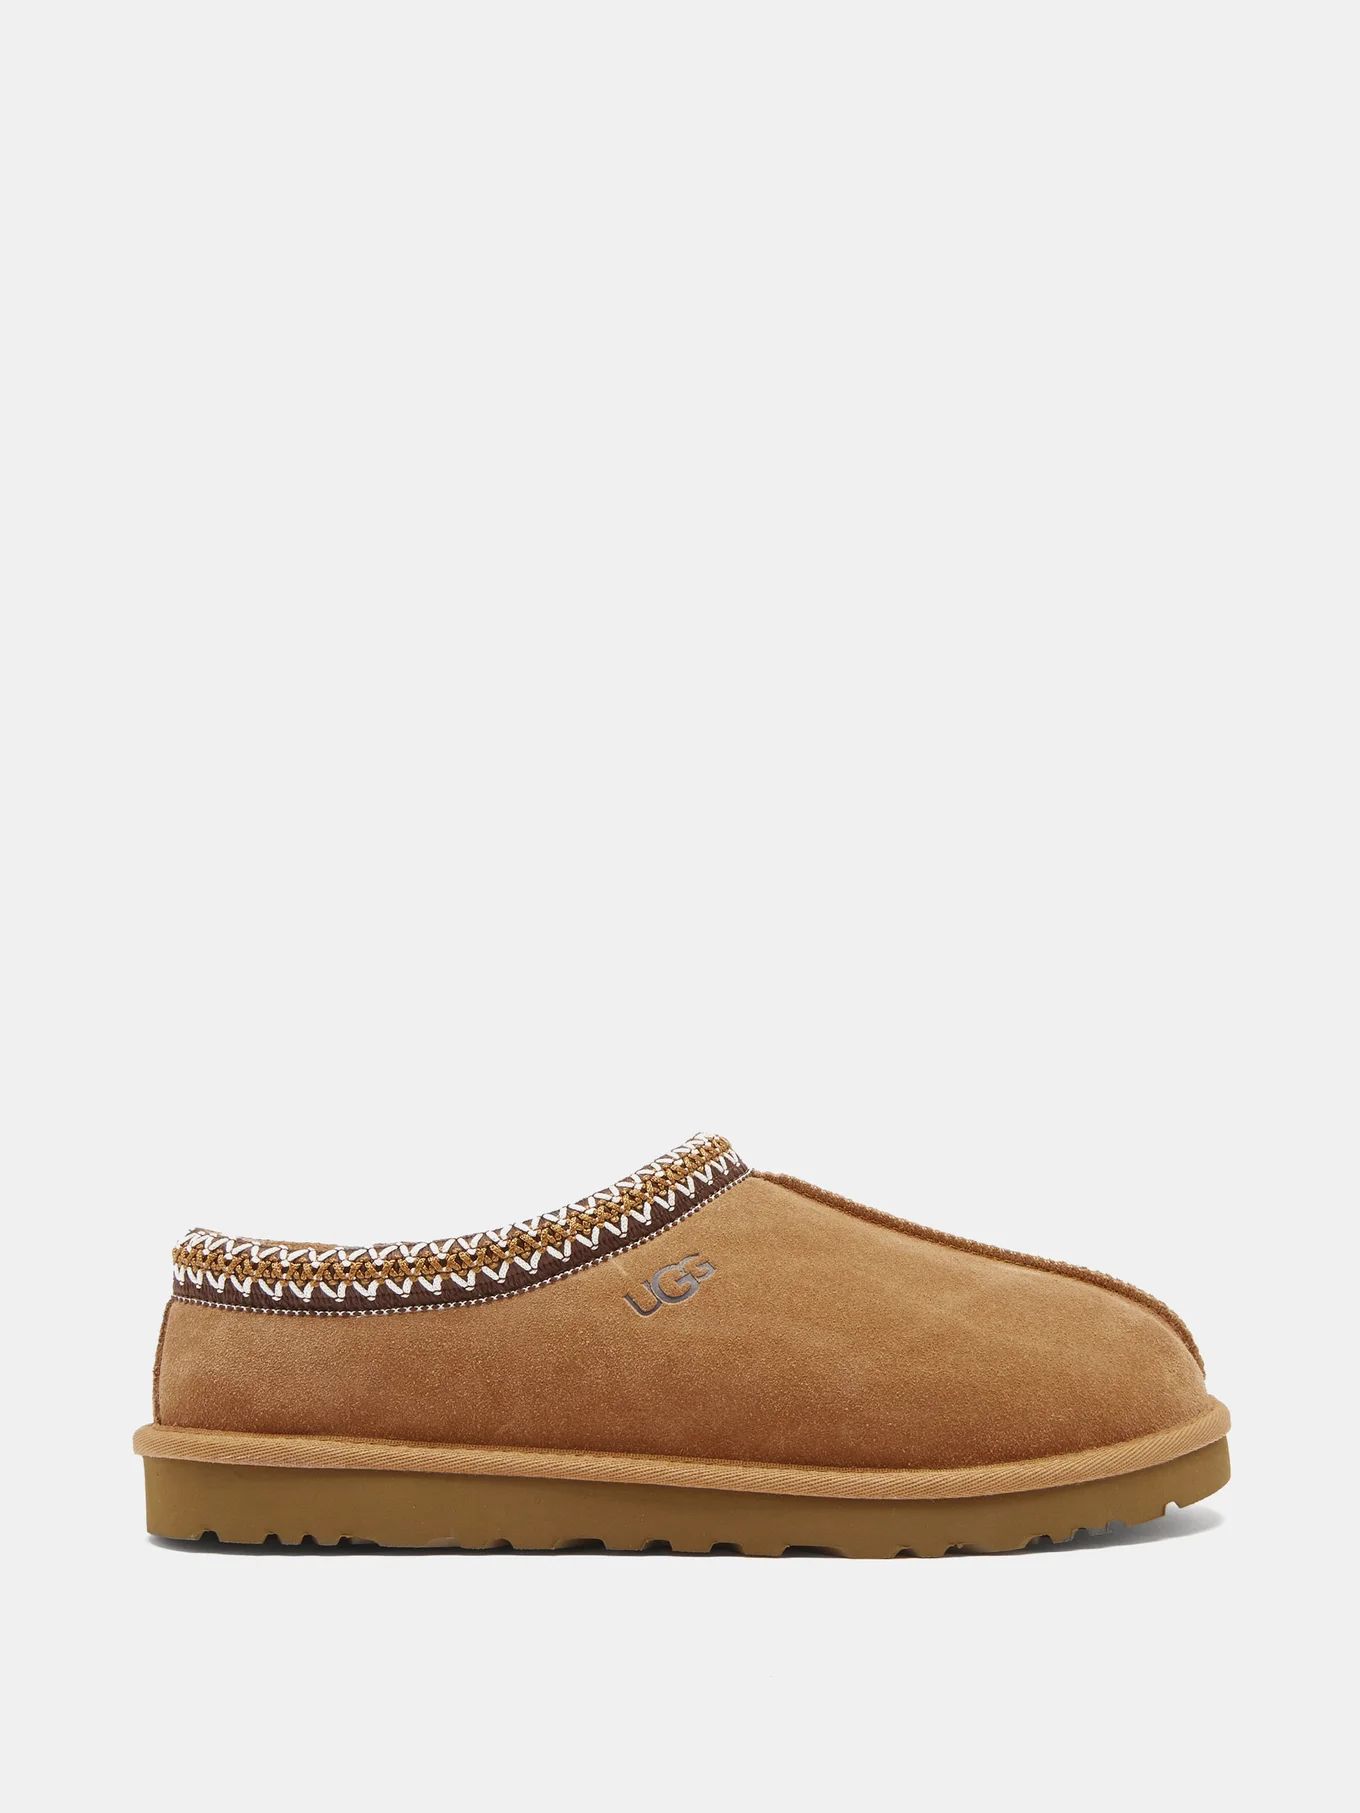 Tasman shearling-lined suede slippers | UGG | Matches (EU)